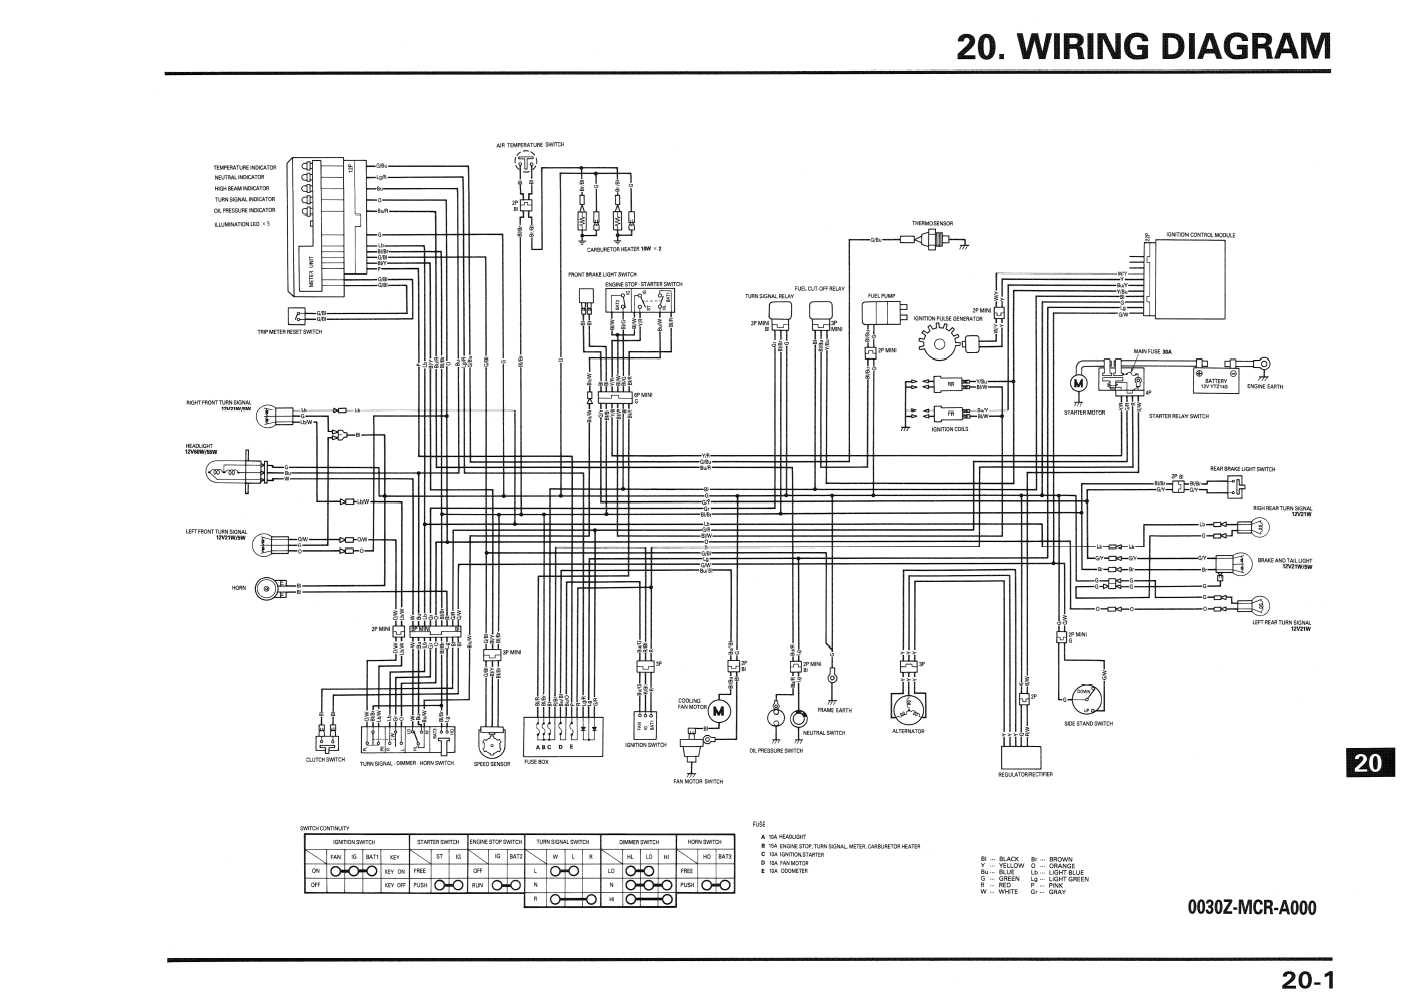 Honda Shadow Ace 1100 Turn Signal Wiring Diagram Collection Wiring